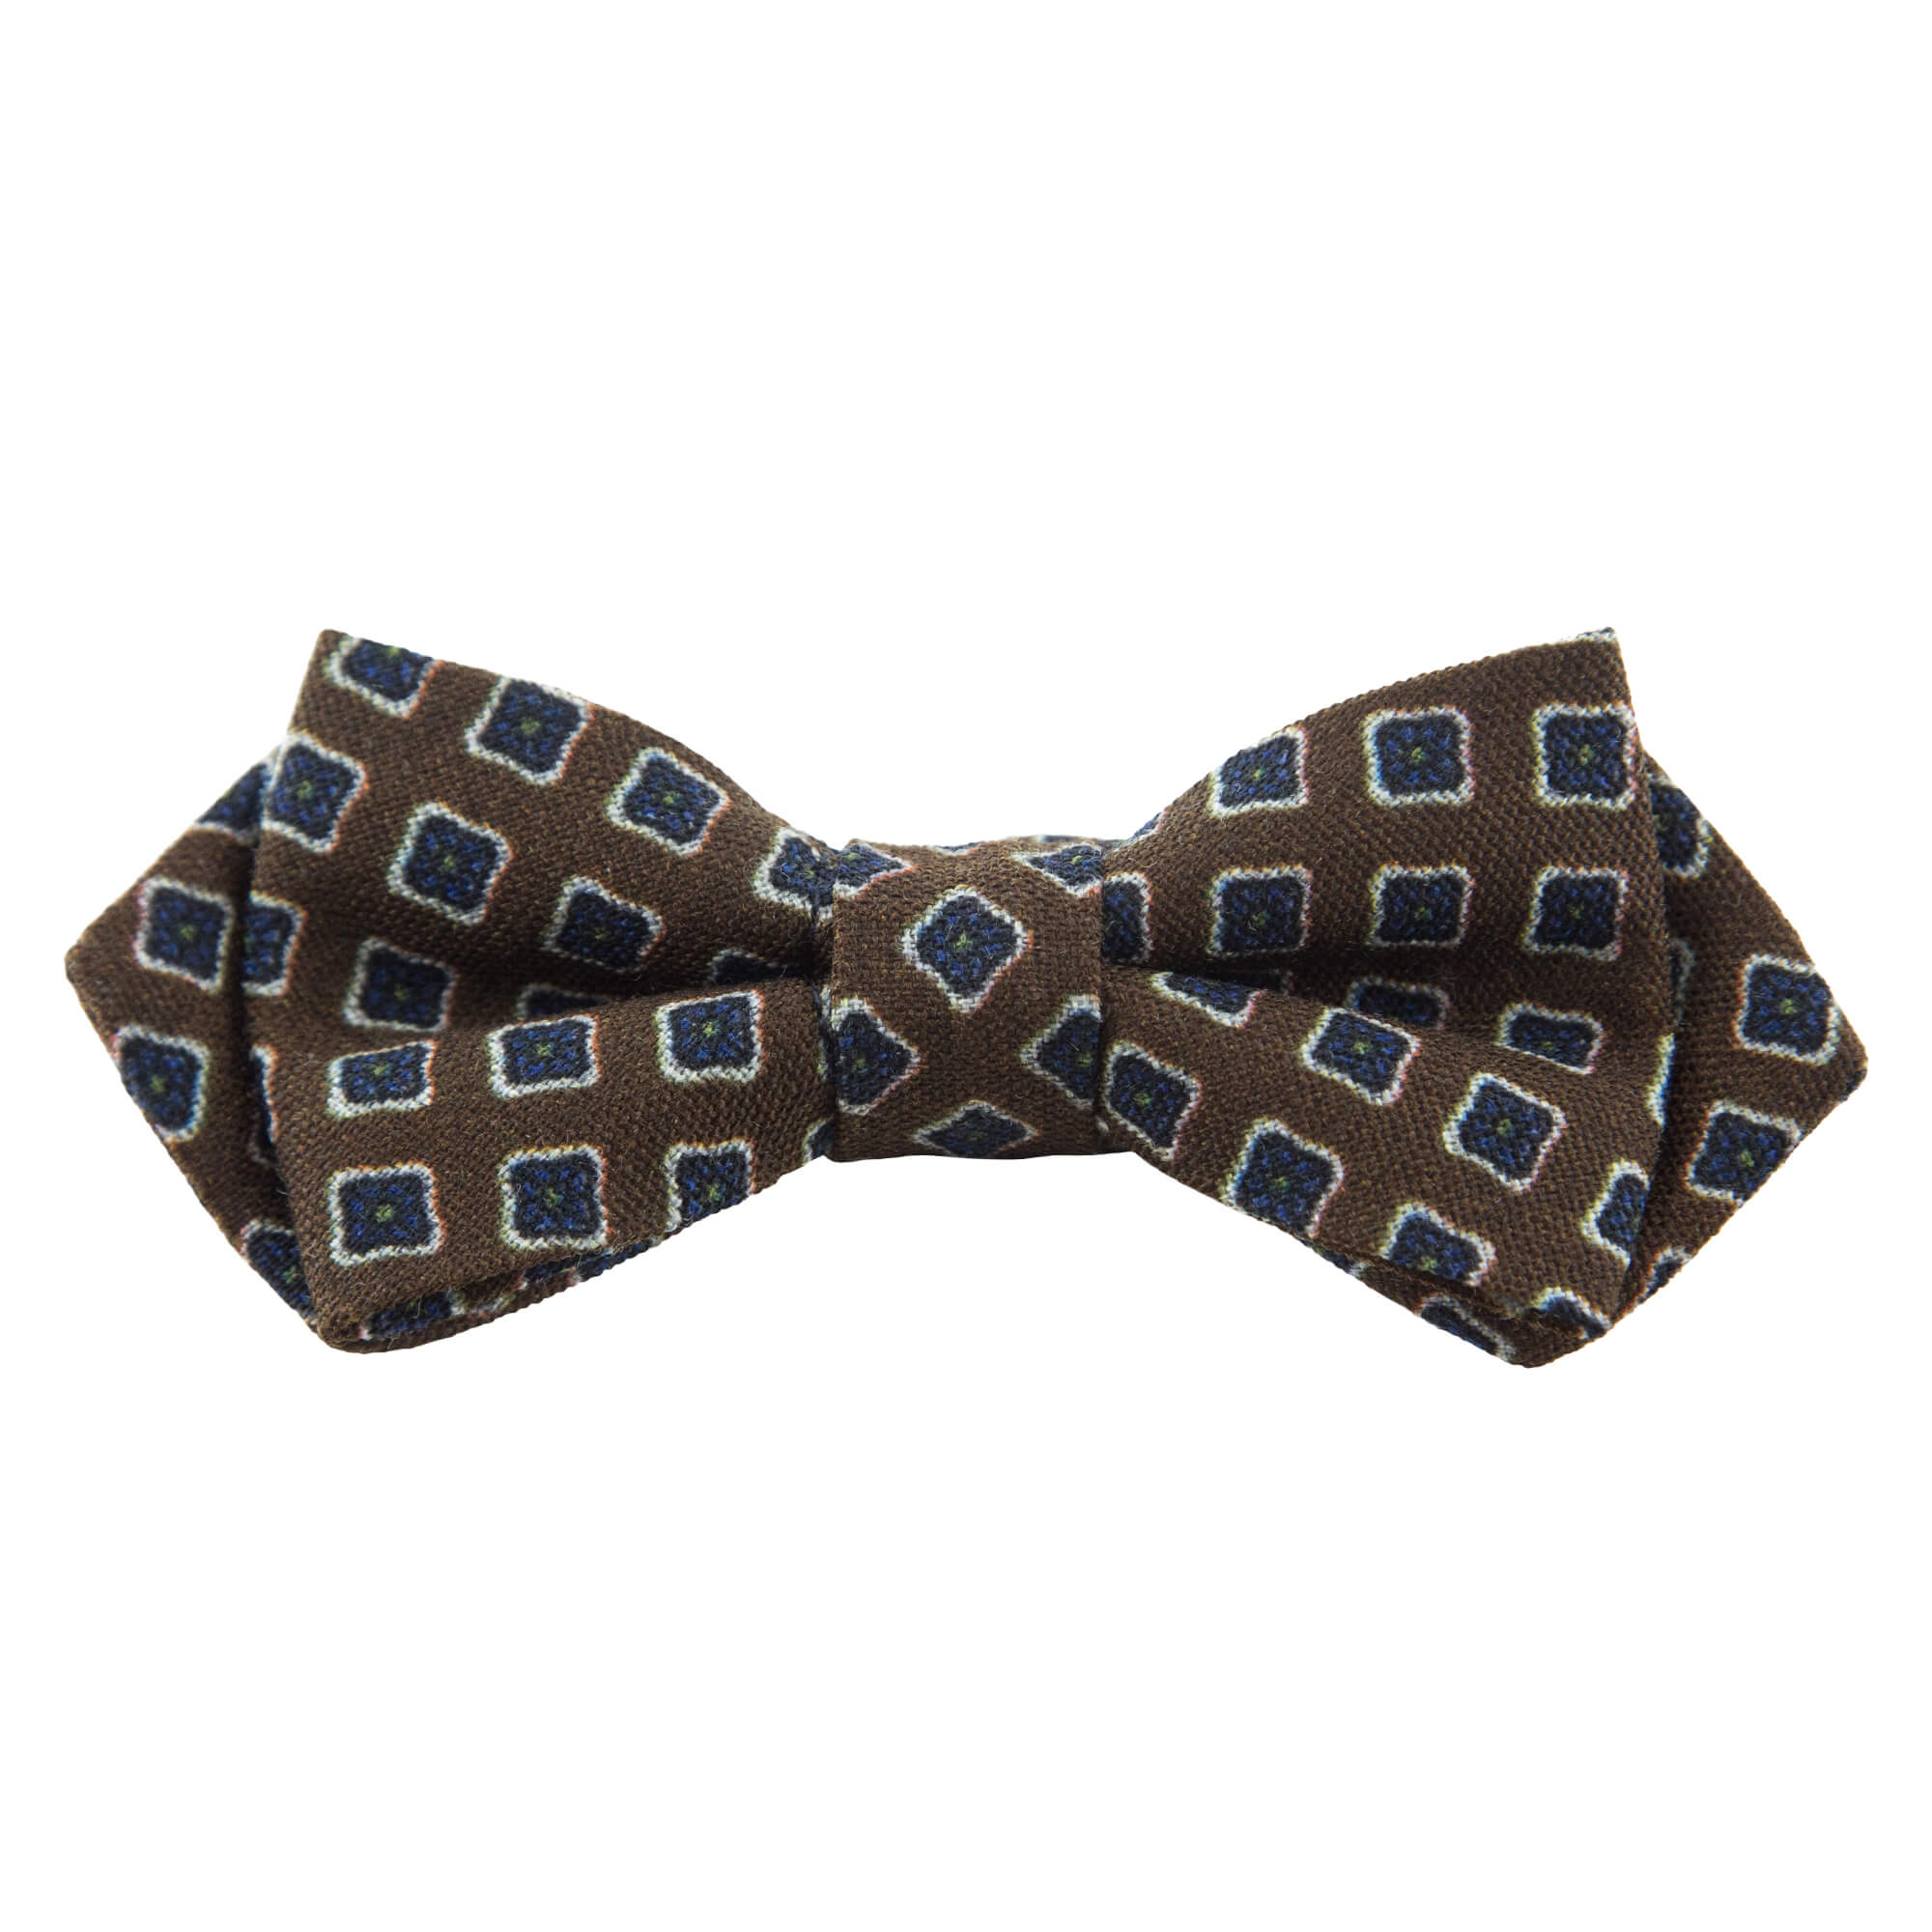 ORANGE WITH WHITE AND BLUE SQUARES BOW TIE